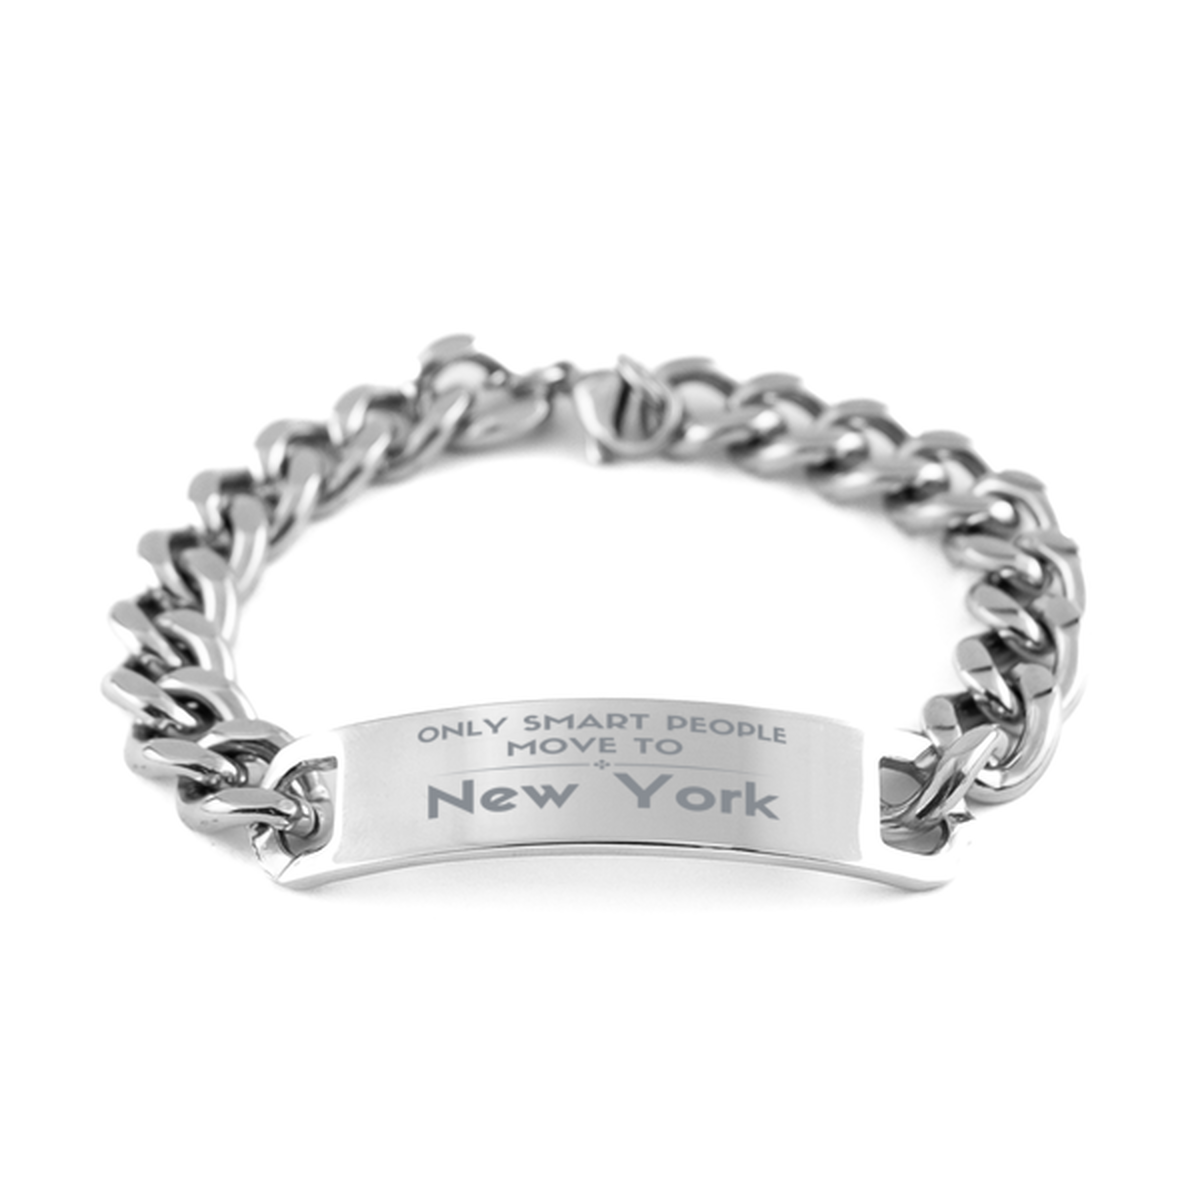 Only smart people move to New York Cuban Chain Stainless Steel Bracelet, Gag Gifts For New York, Move to New York Gifts for Friends Coworker Funny Saying Quote